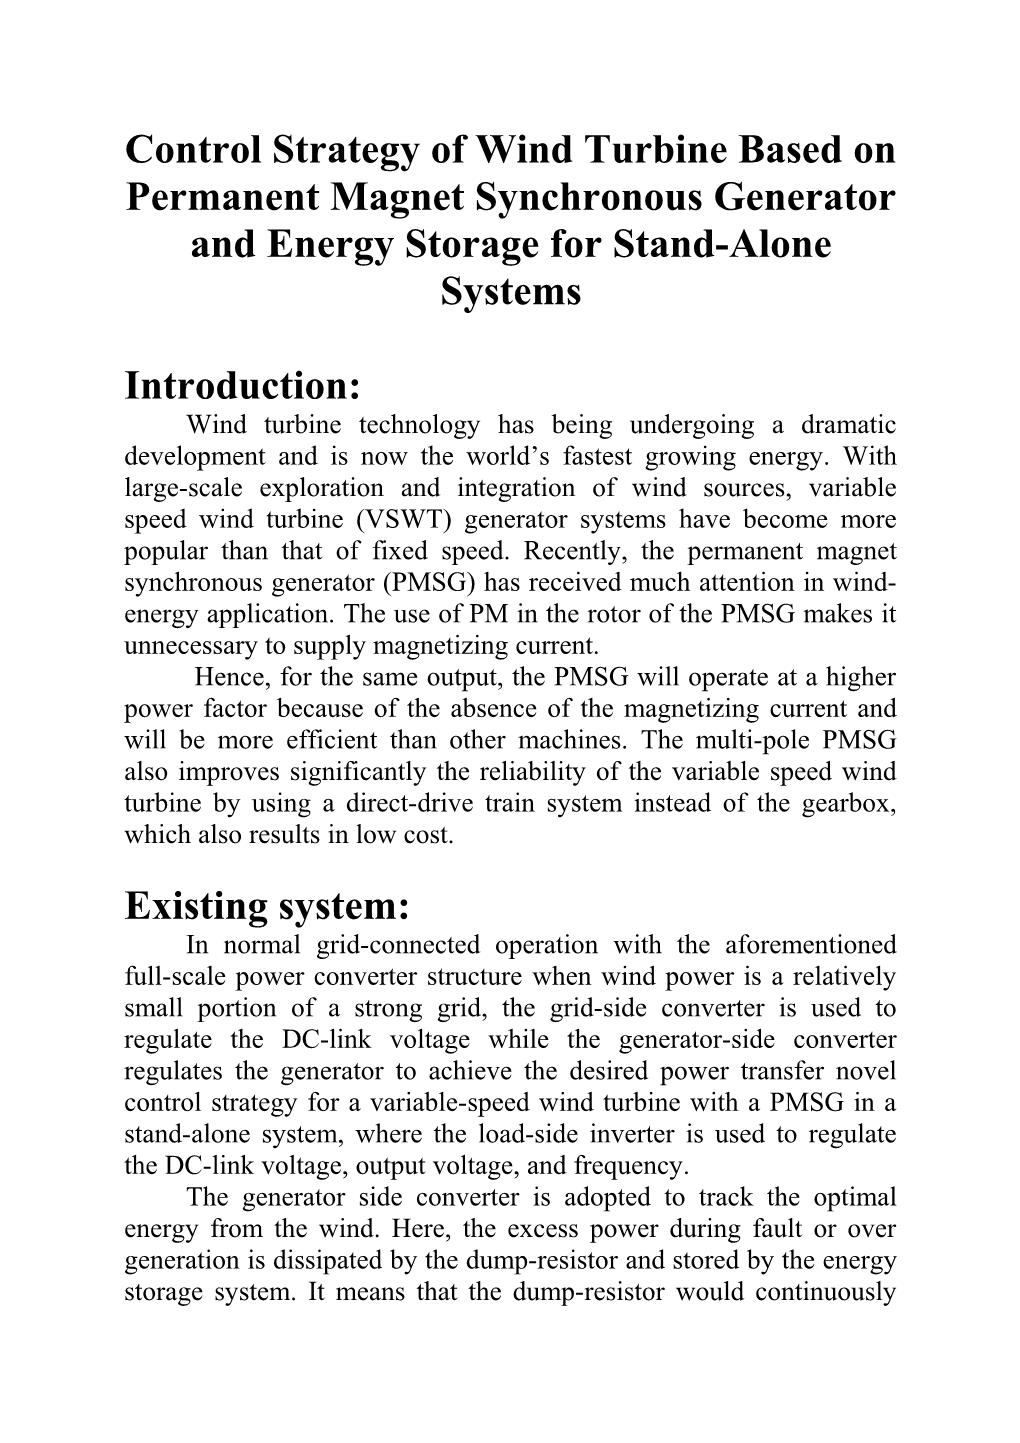 Control Strategy of Wind Turbine Based On